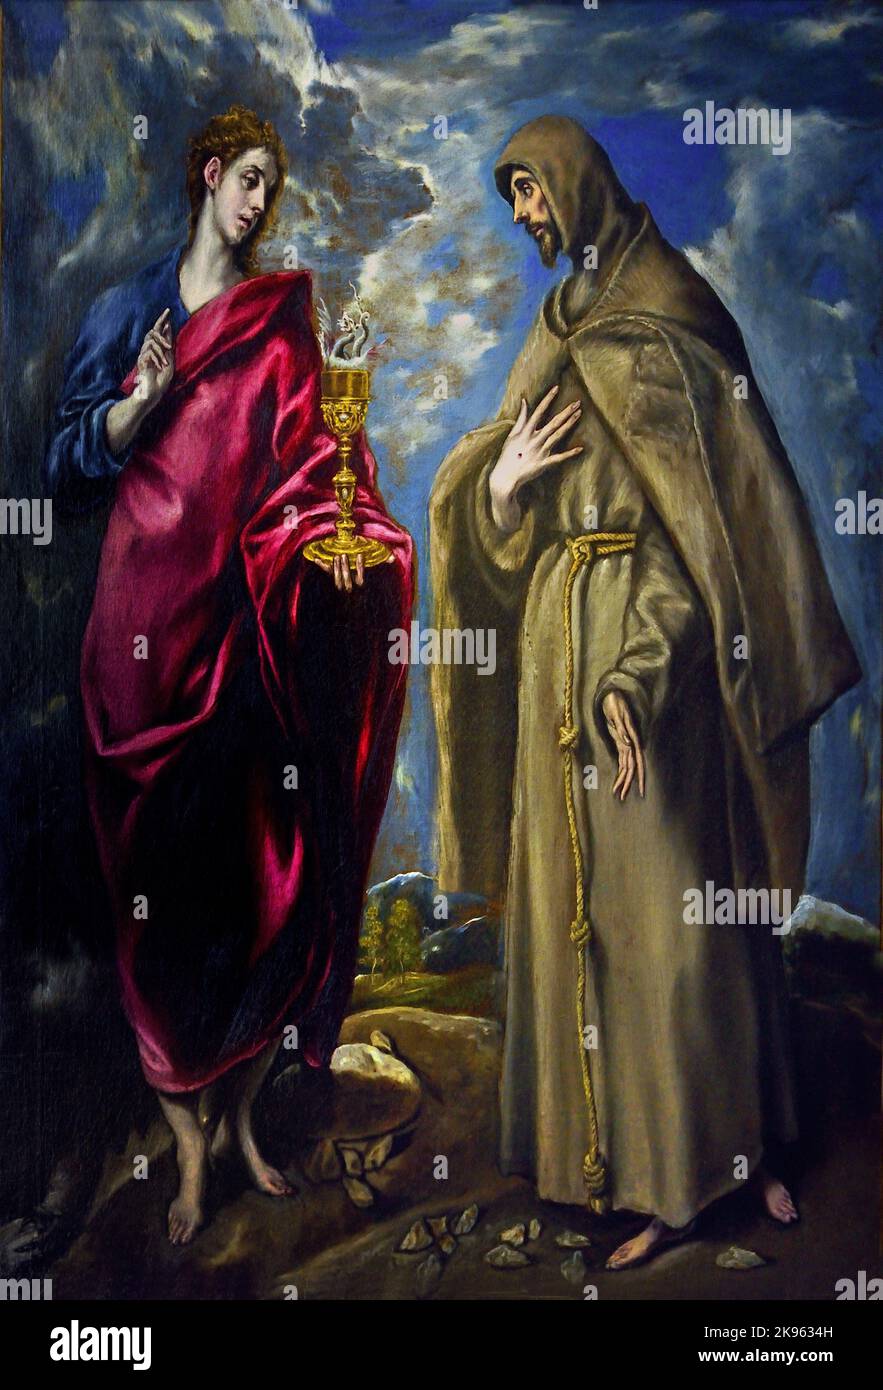 Saint John the Evangelist and Saint Francis Dominikos Theotokopulos, known as El Greco (Candia 1541 – Toledo 1614) Greek Spanish Spain. (The two saints, with their elongated, bodies and suffering faces, loom large in the foreground, set against a, sky full of lead grey clouds. ) Stock Photo